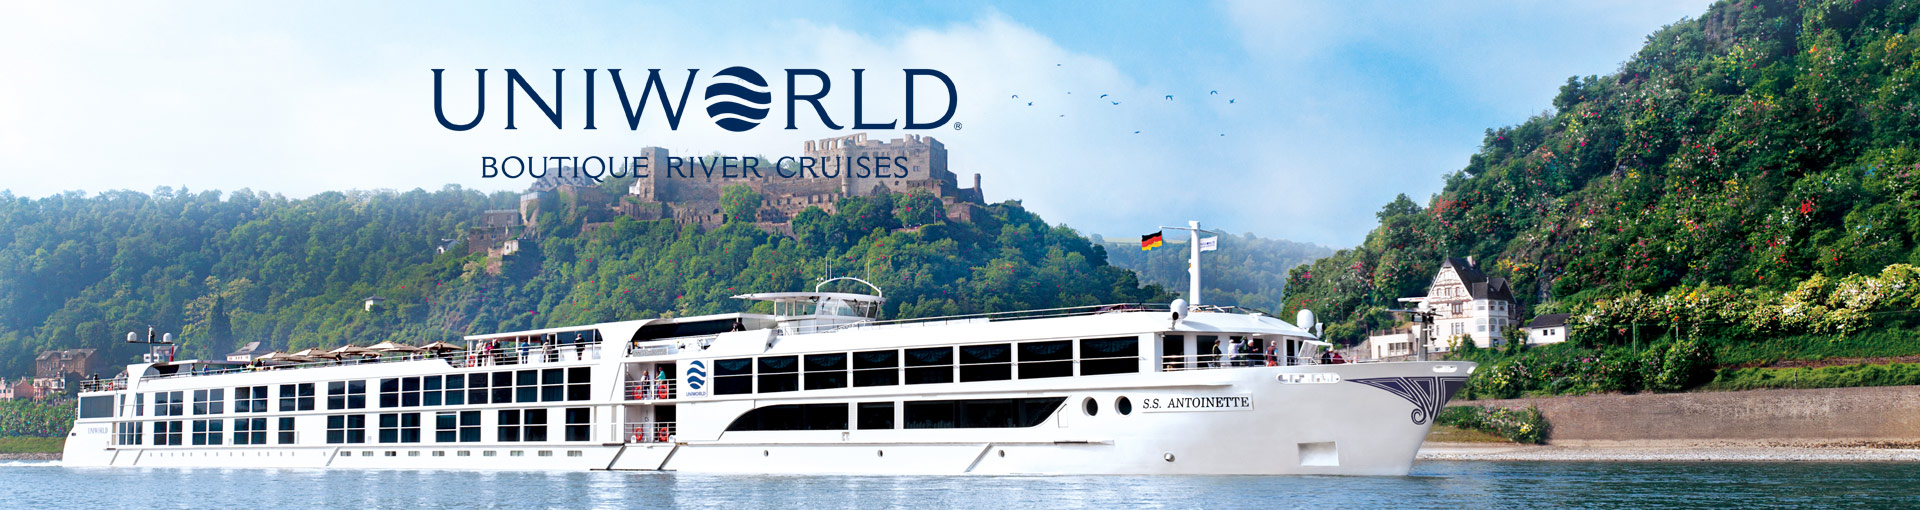 Already Booked with Uniworld Boutique River Cruises